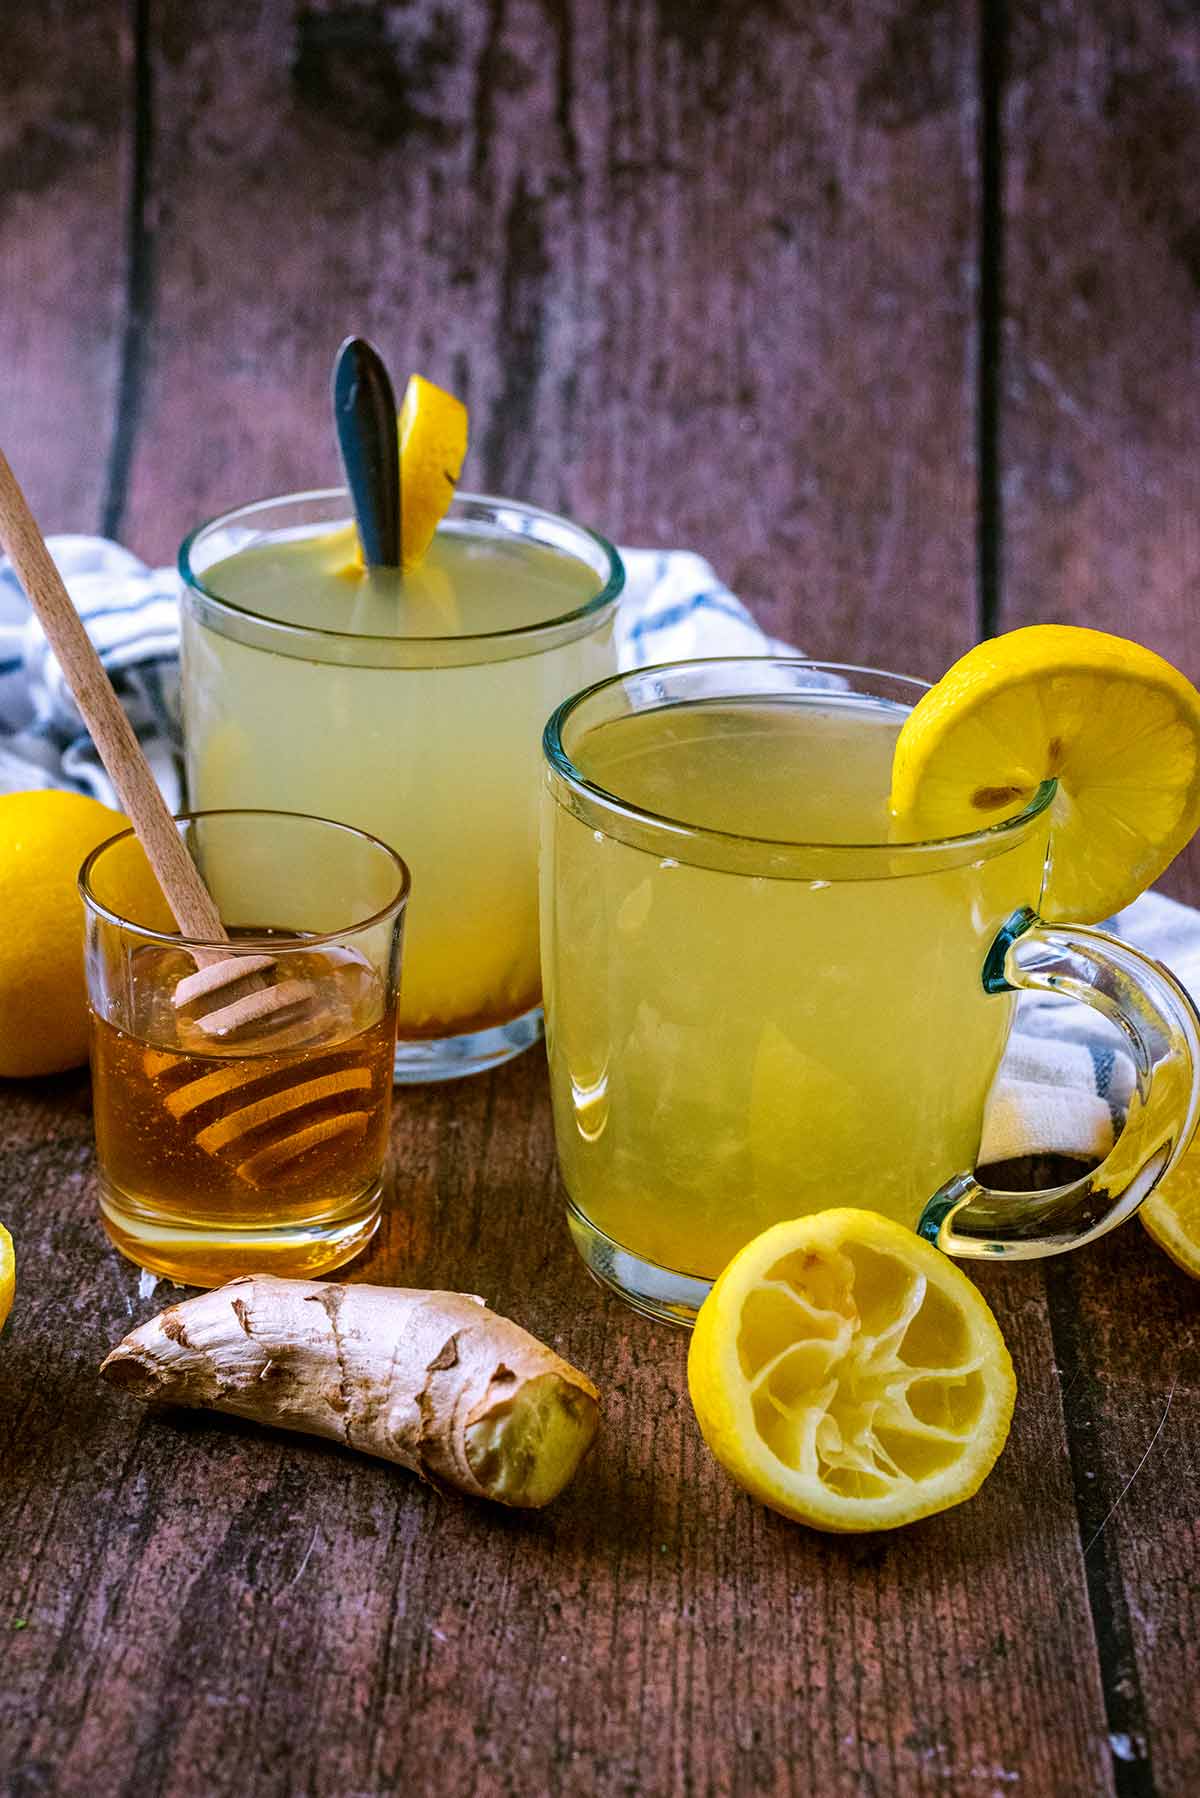 Two glasses of hot lemon and honey on a wooden surface.